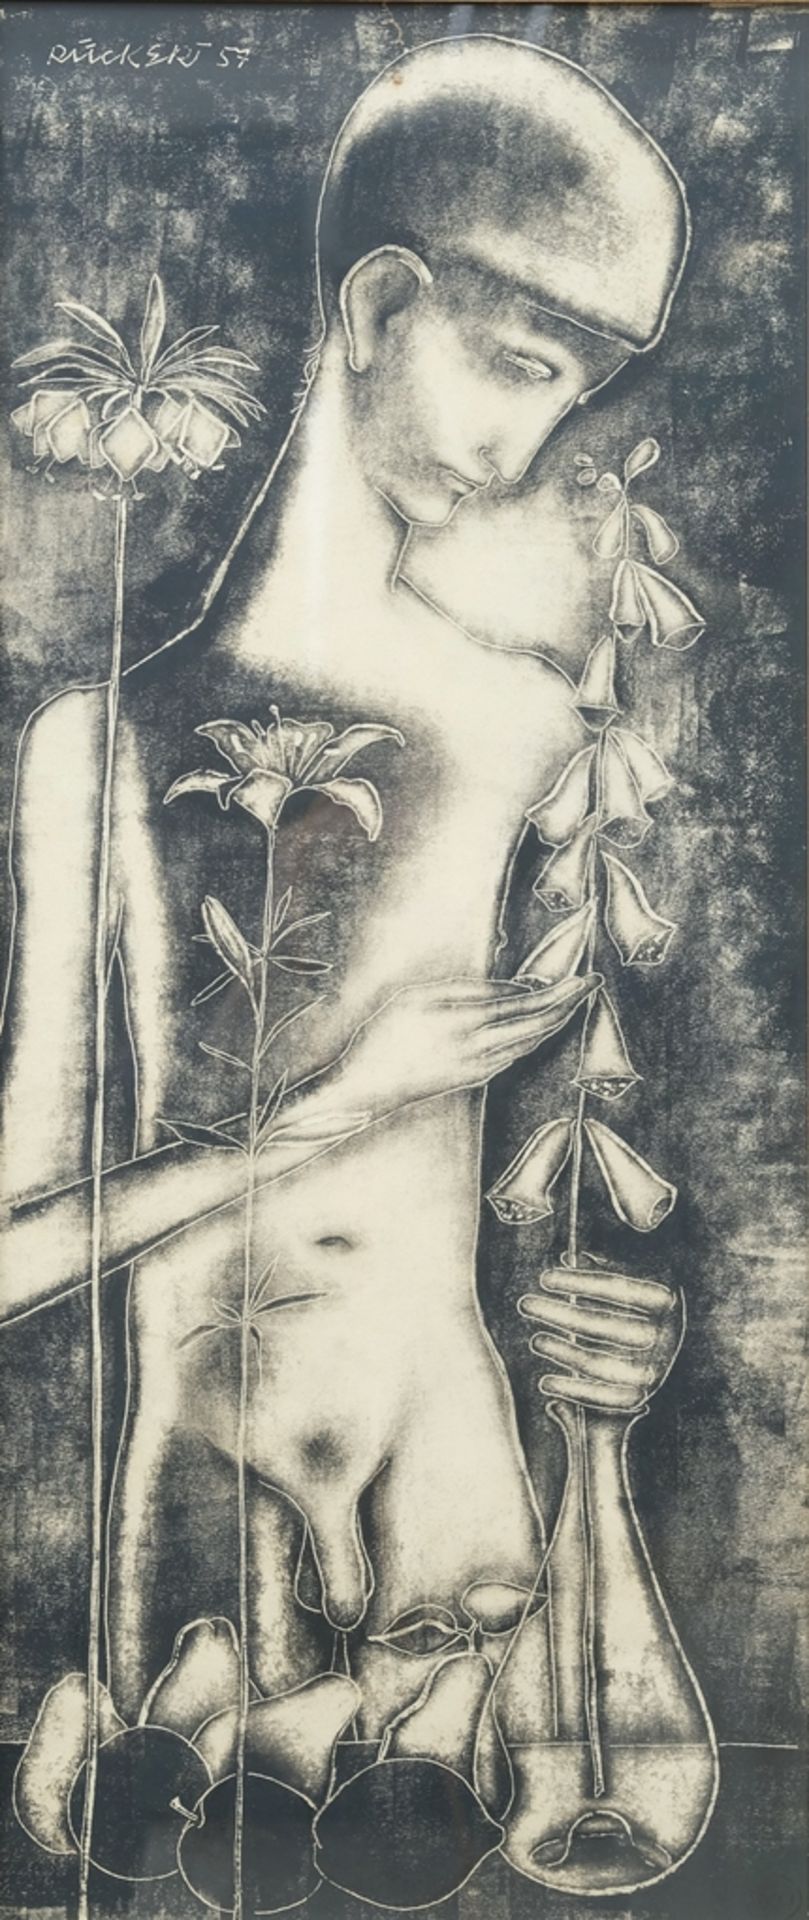 Rückert, Erich-Andreas (1920-2016) Male Nude (Dr Klemmt), 1957, charcoal on paper. 